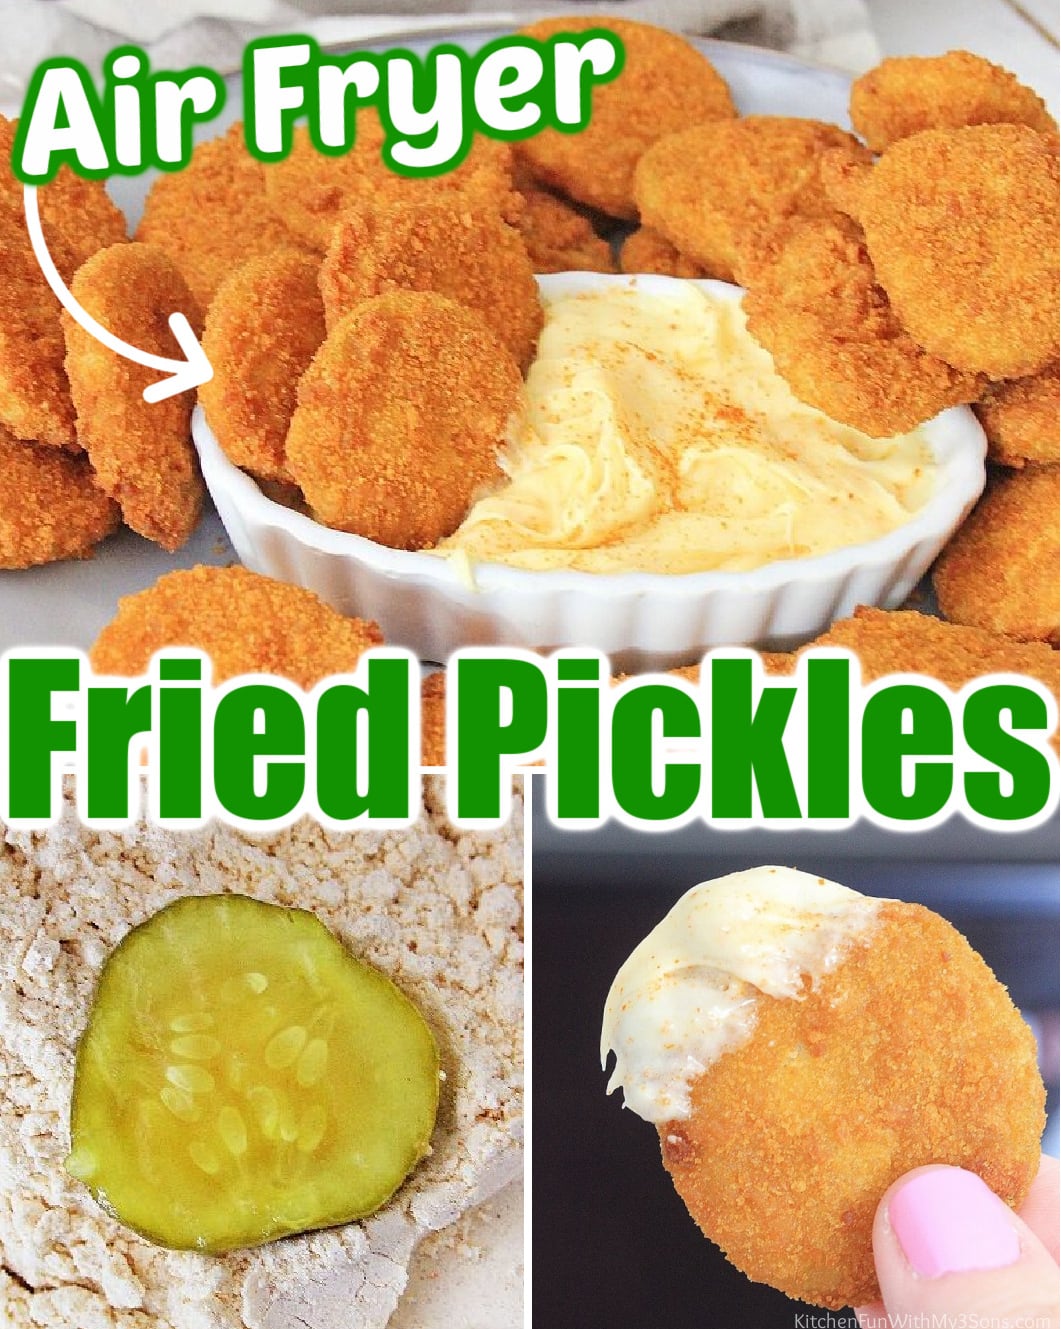 Collage of 3 images of air fryer pickles